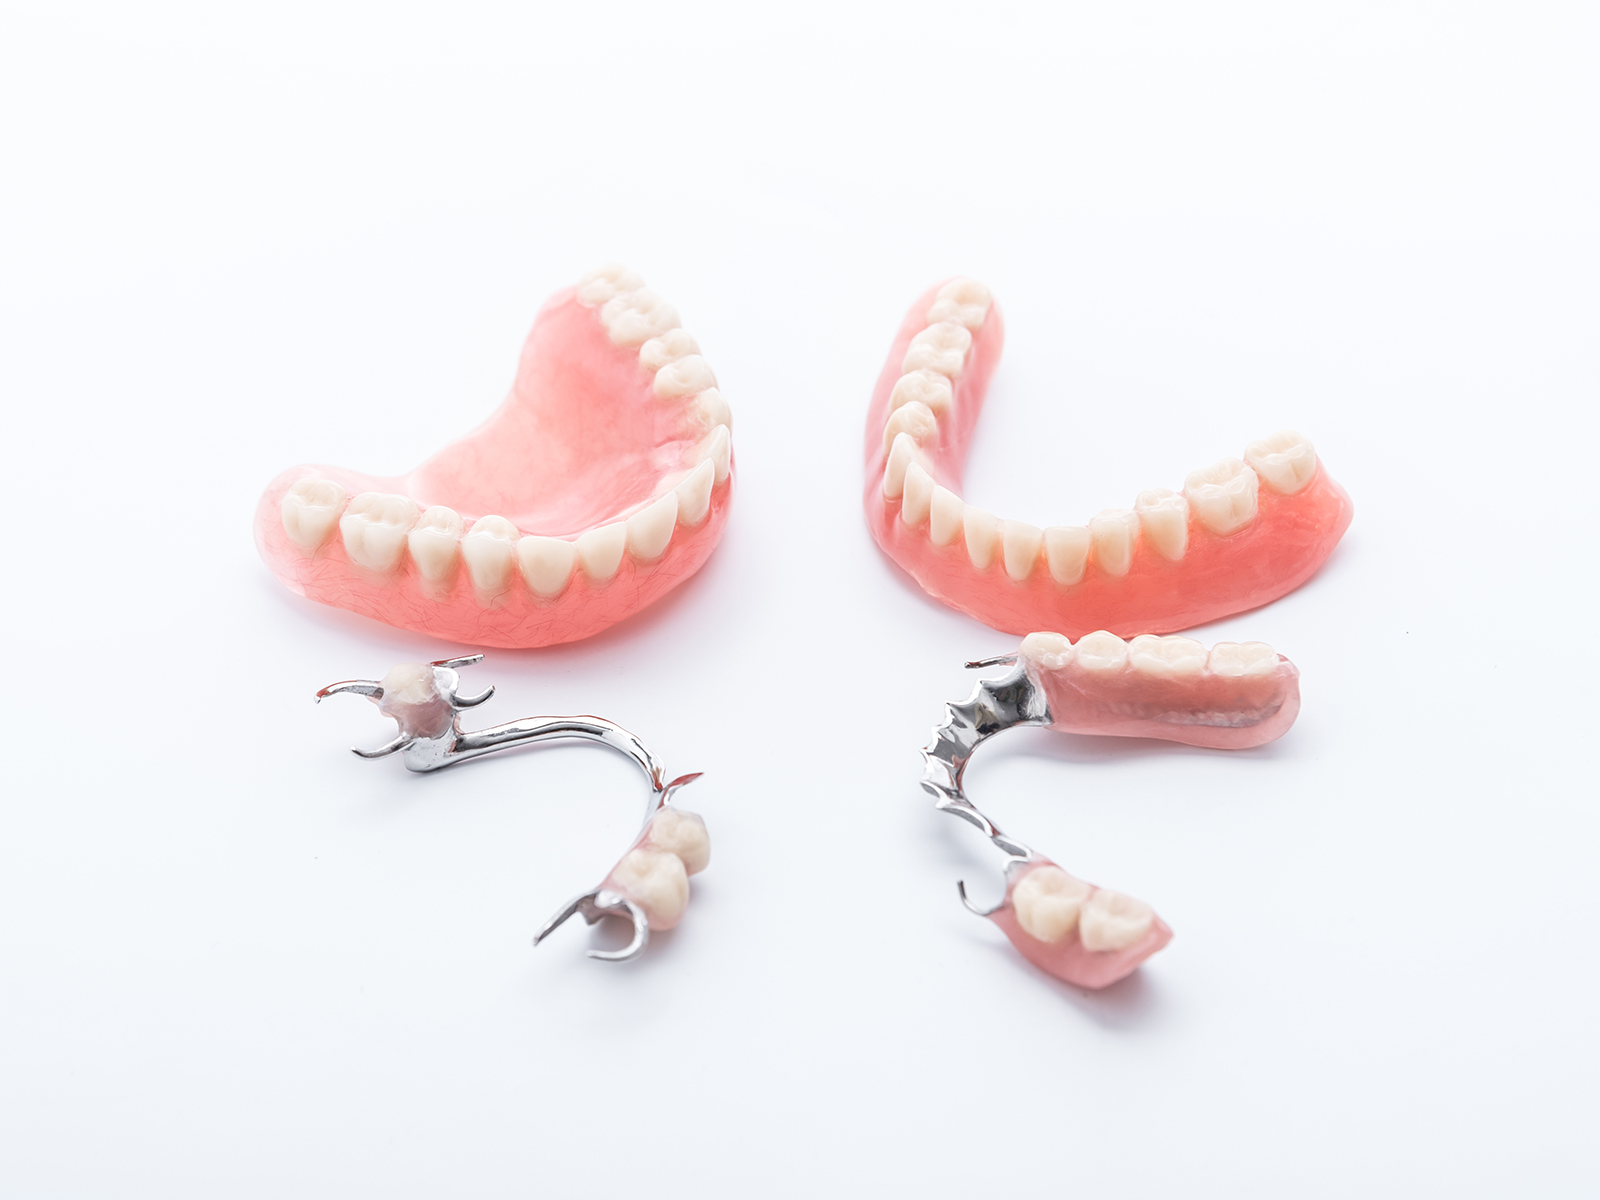 How much bone loss do you get with dentures?